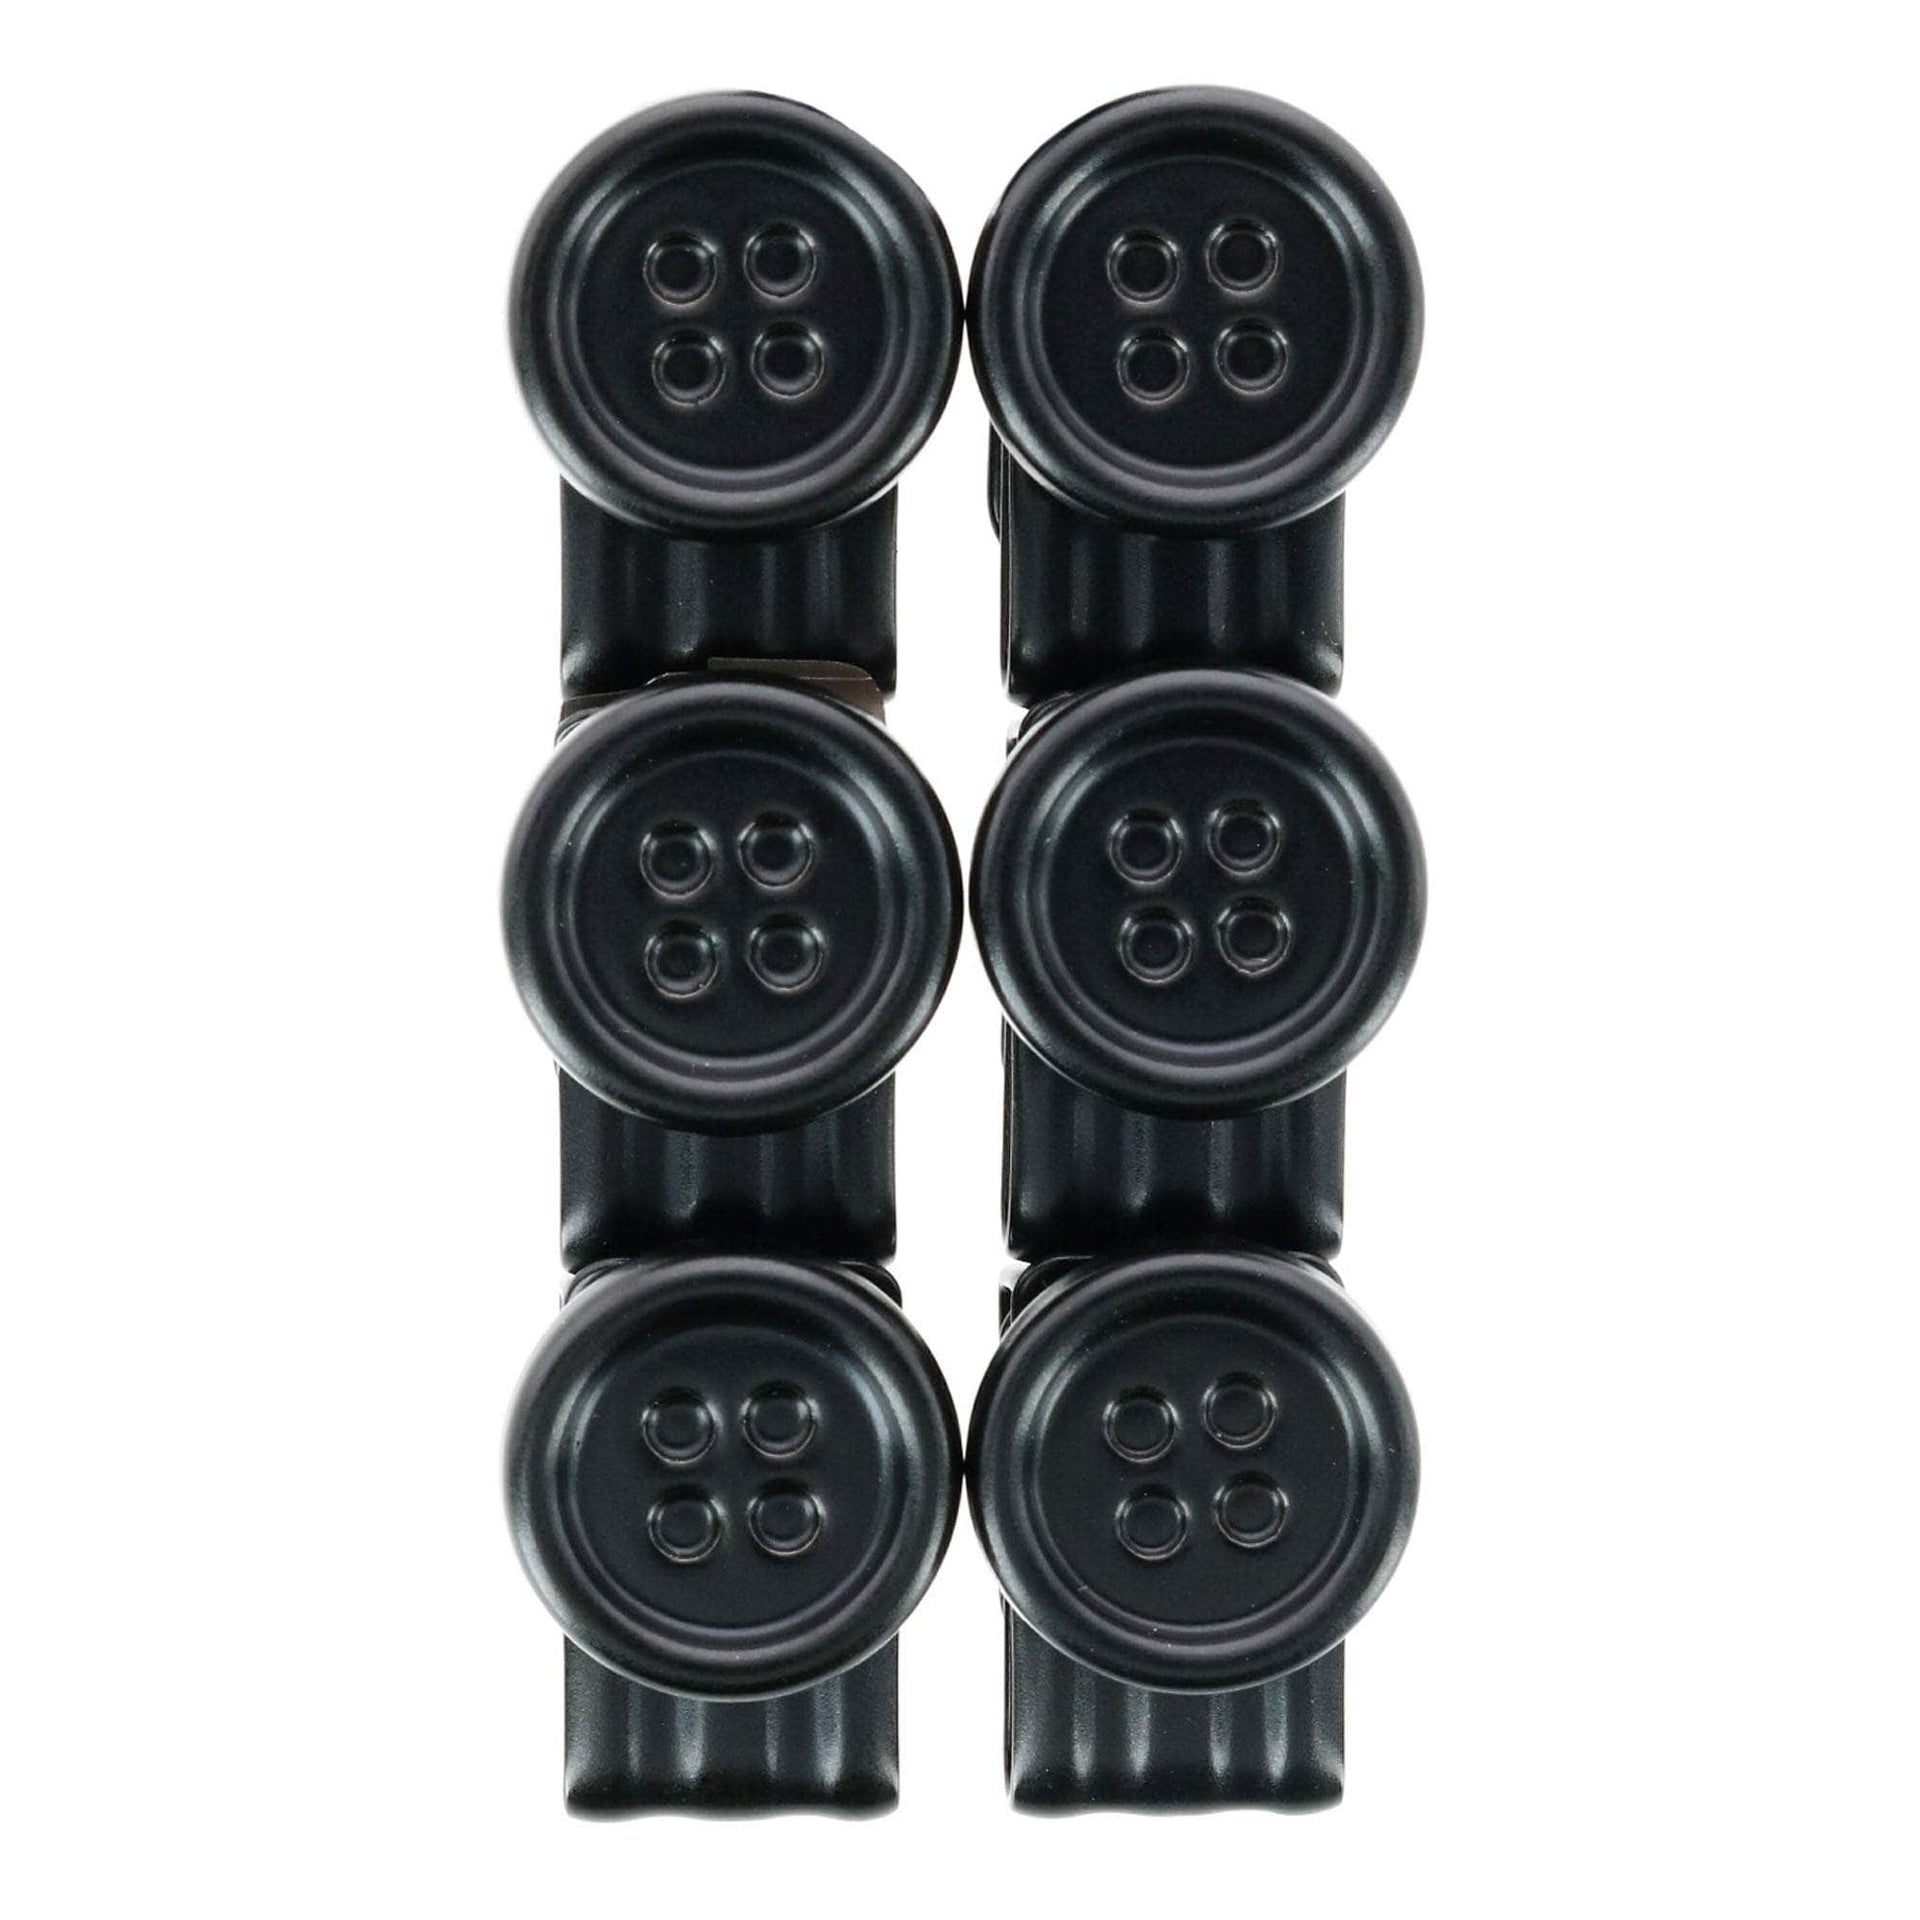 No Sew Moveable Button End Brace Clips (Set of 6) by Trafalgar